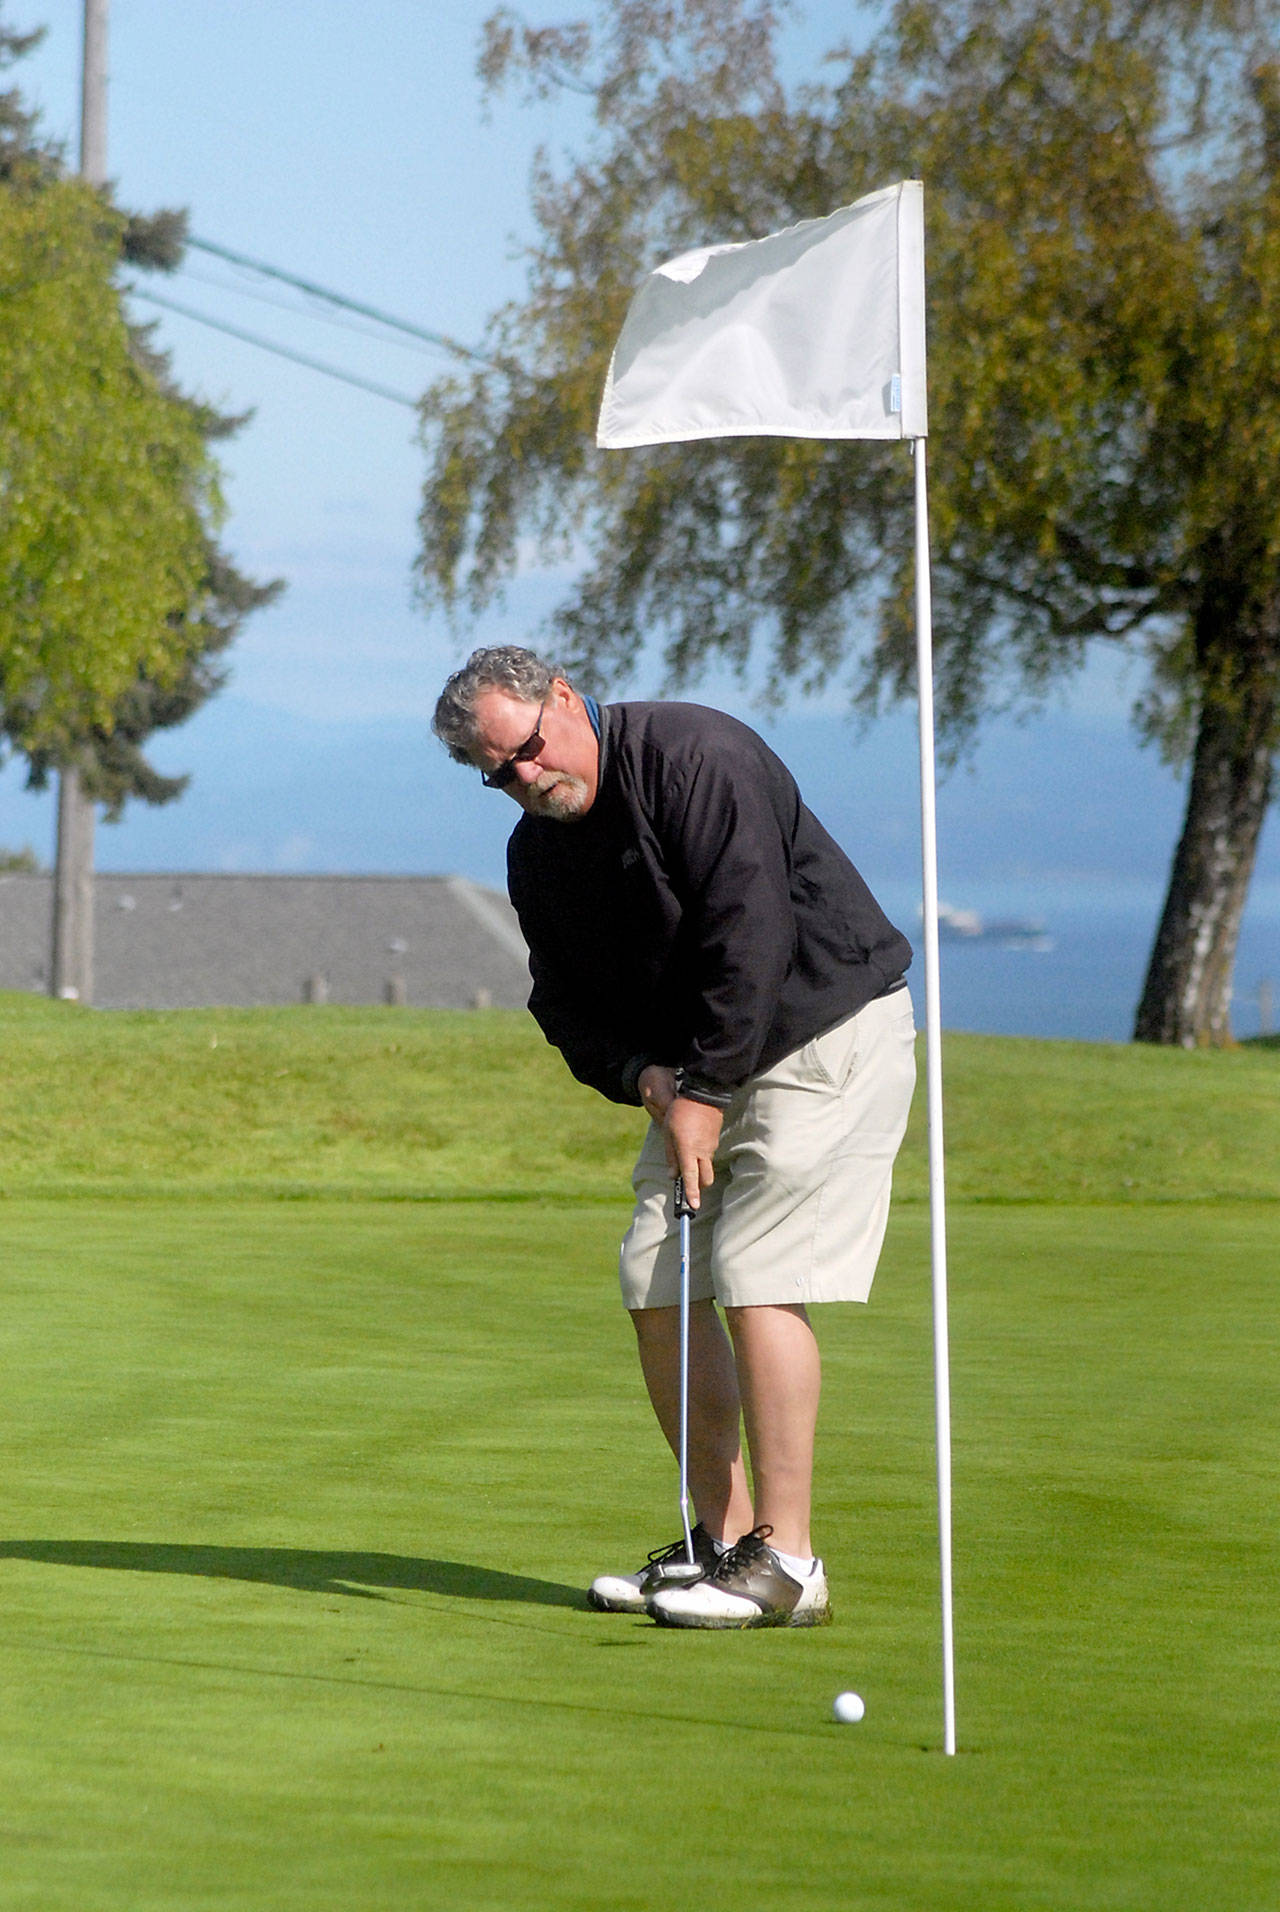 Lawrence Bingham of Port Angeles putts at Peninsula Golf Course in Port Angeles on Tuesday, May 5, 2020, as golf courses around the state reopened for play. (Keith Thorpe/Peninsula Daily News)